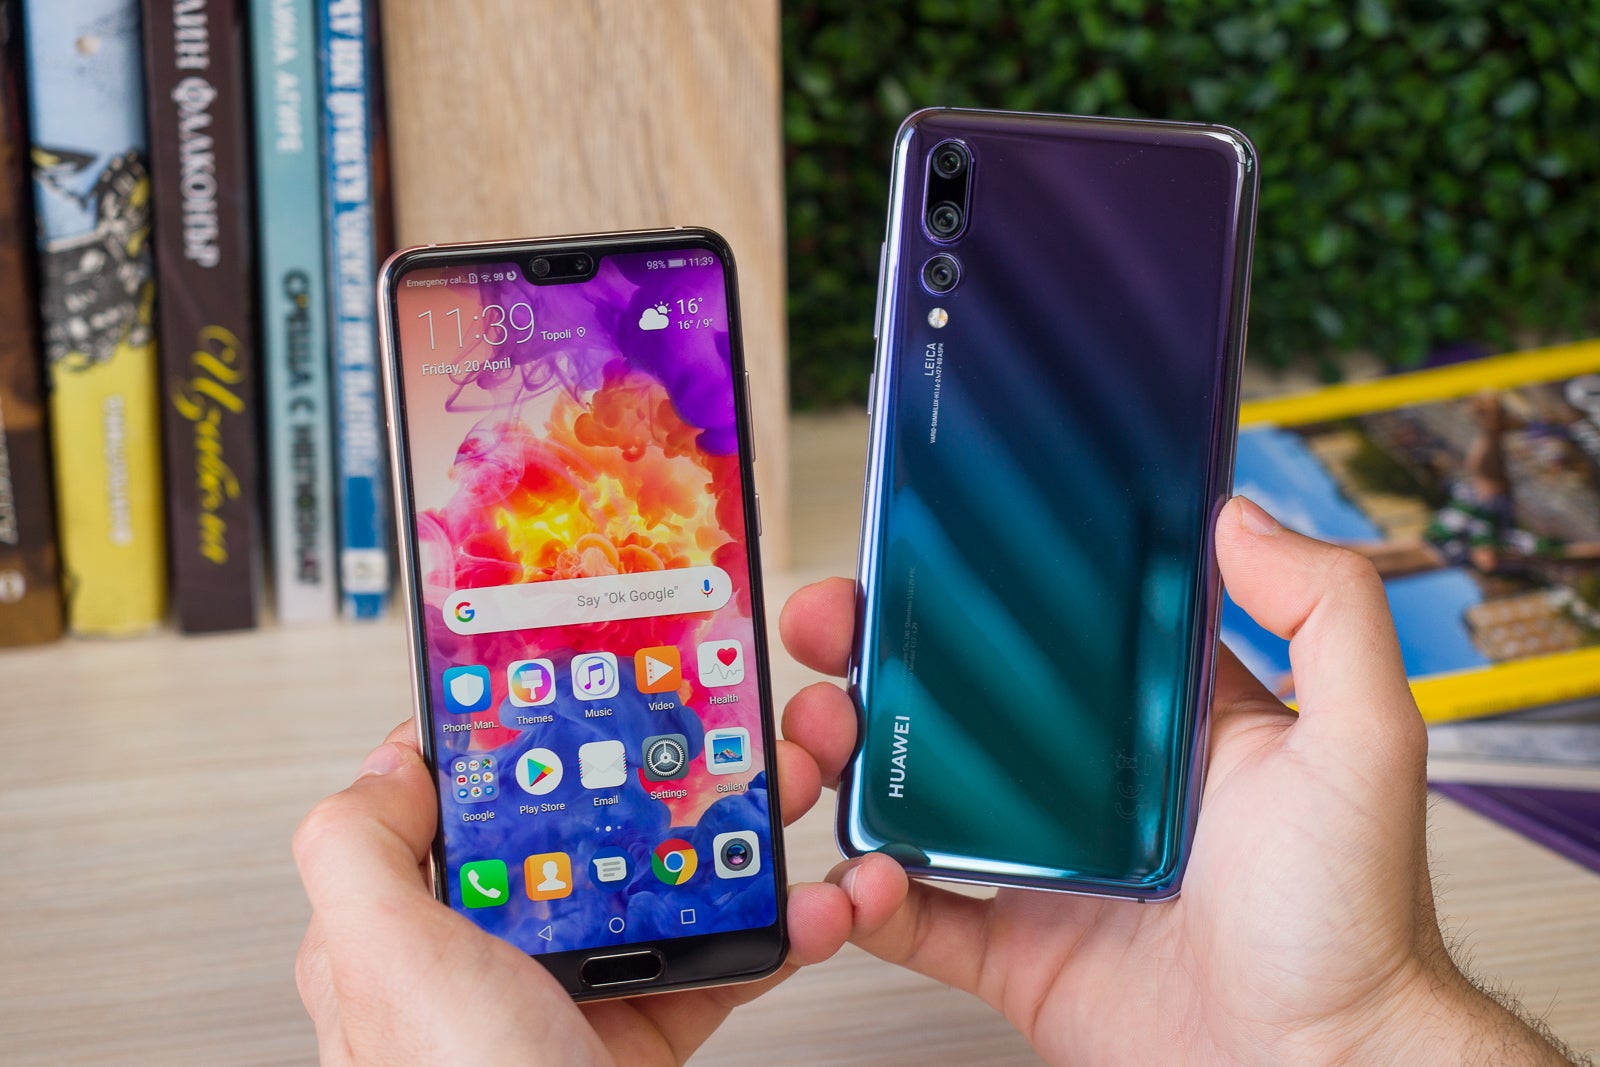 The Twilight Blue gradient of the P20 Pro showed innovation is possible with glass phone design - What were the top features of 2018 smartphones?